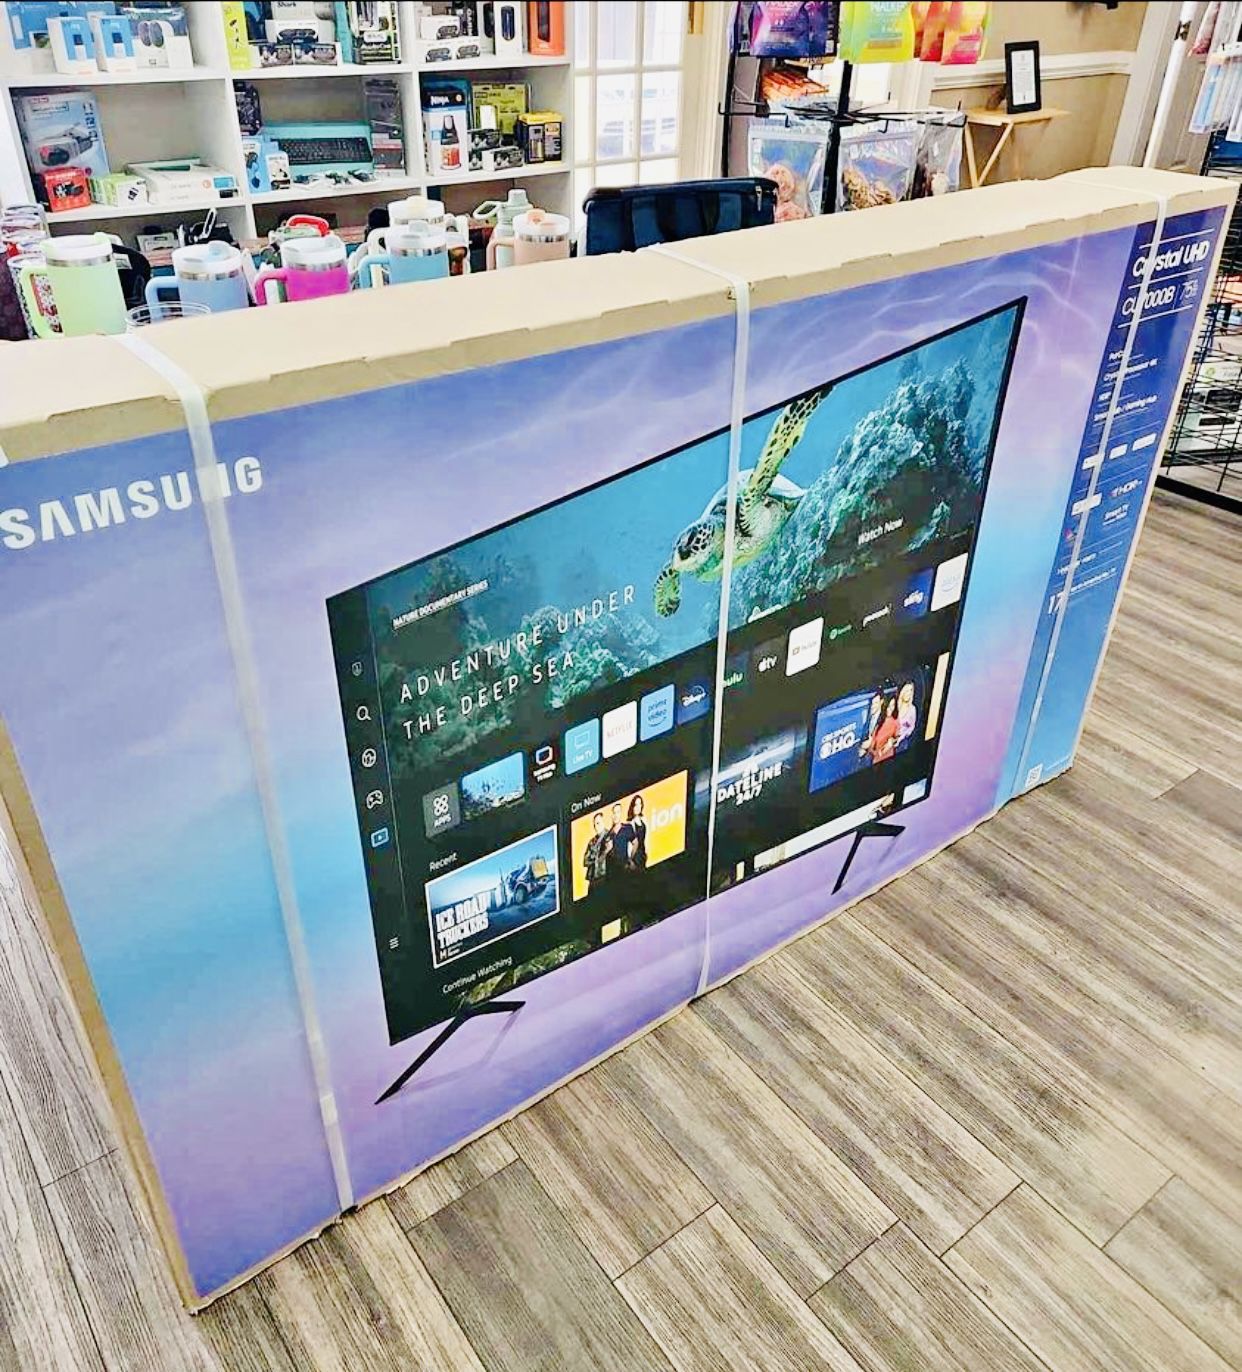 Samsung - 75" Class 7 Series LED 4K UHD Smart Tizen TV  Brand New In Box  Delivery Available